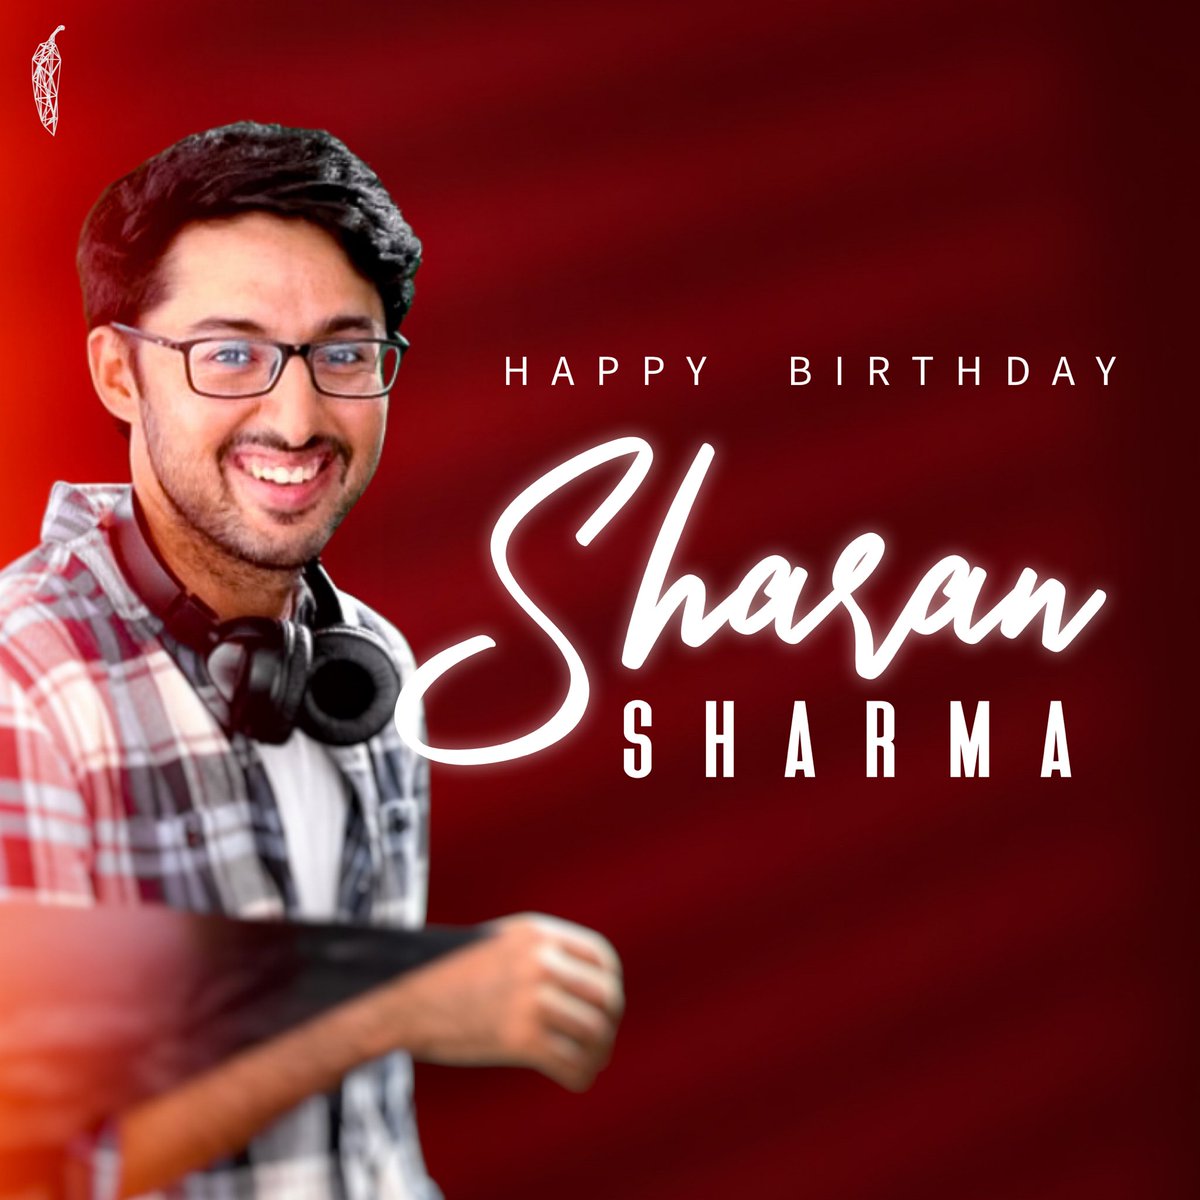 Happy birthday #SharanSharma!
Working with you on #GunjanSaxena was an experience in itself, with your vivacious energy & eye for detail, taking the film to new 'heights'🚁!

May this year bring in exciting opportunities for you! 

#HappyBirthdaySharanSharma
@sharansharma 

🎂🌶